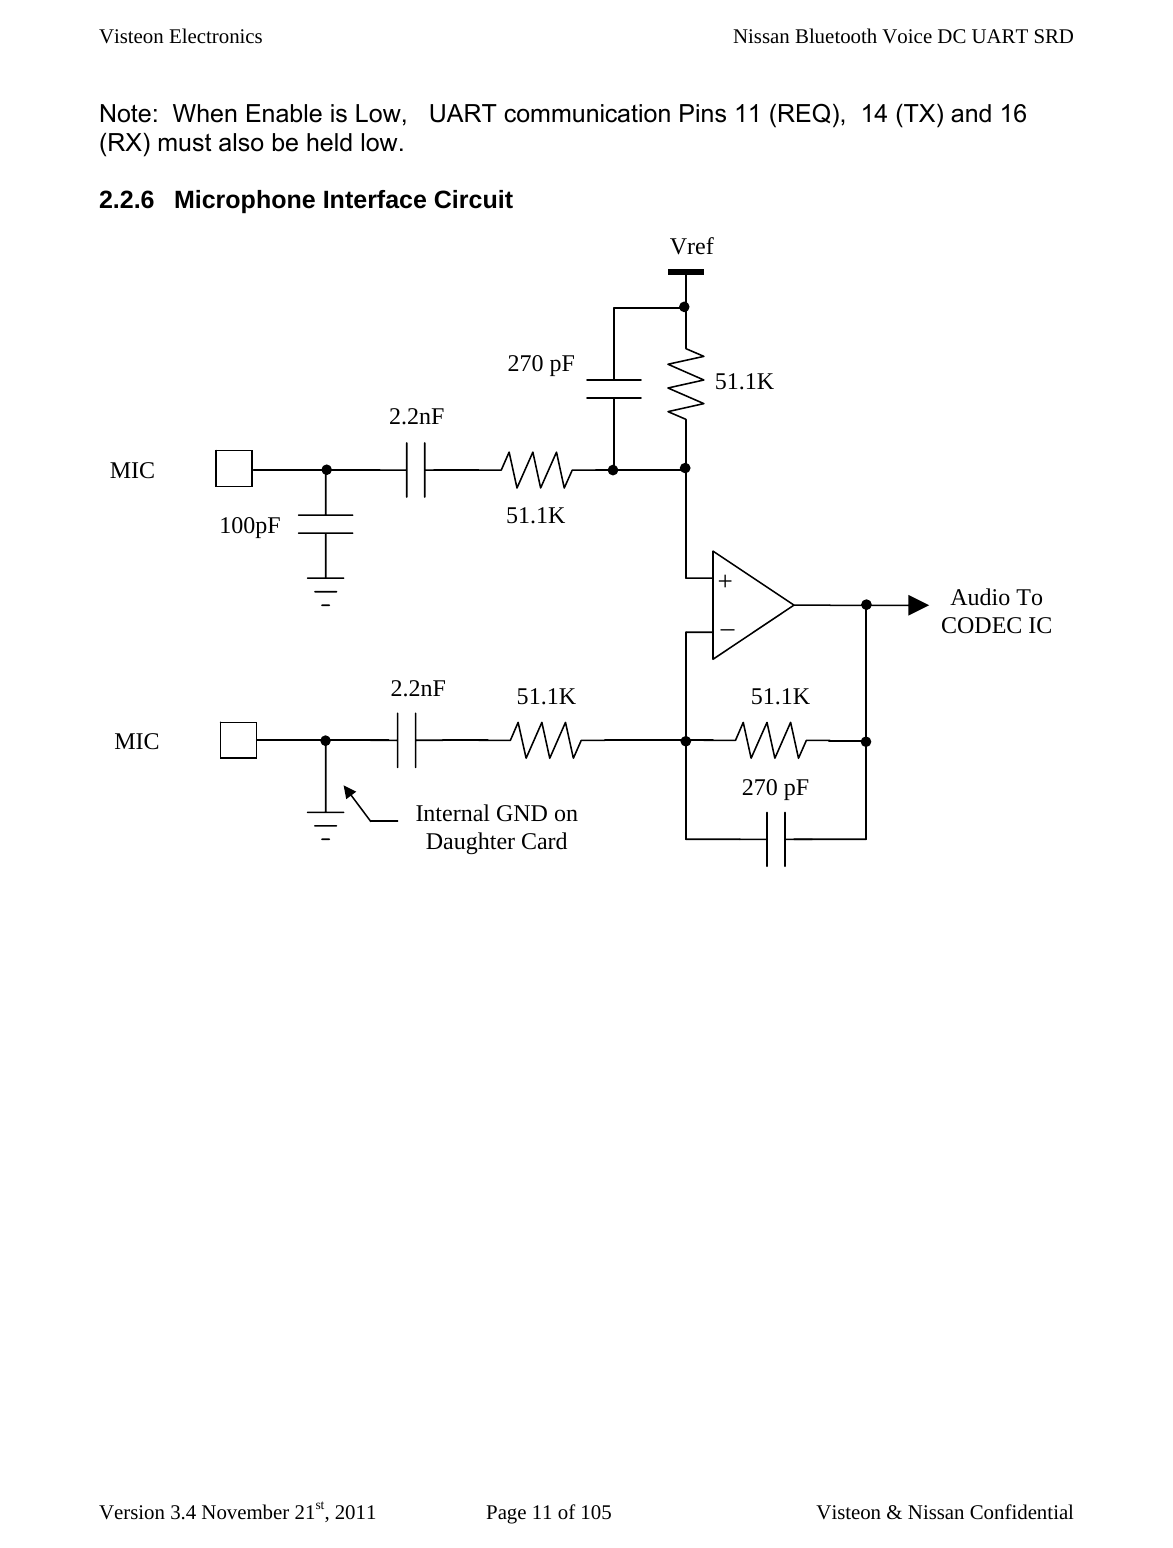 Visteon Electronics    Nissan Bluetooth Voice DC UART SRD  Version 3.4 November 21st, 2011  Page 11 of 105  Visteon &amp; Nissan Confidential Note:  When Enable is Low,   UART communication Pins 11 (REQ),  14 (TX) and 16 (RX) must also be held low.   2.2.6  Microphone Interface Circuit  MIC 51.1K Audio To  CODEC IC 51.1K 100pF 2.2nF 2.2nF MIC +_ Vref 51.1K 51.1K 270 pF 270 pF Internal GND on Daughter Card 